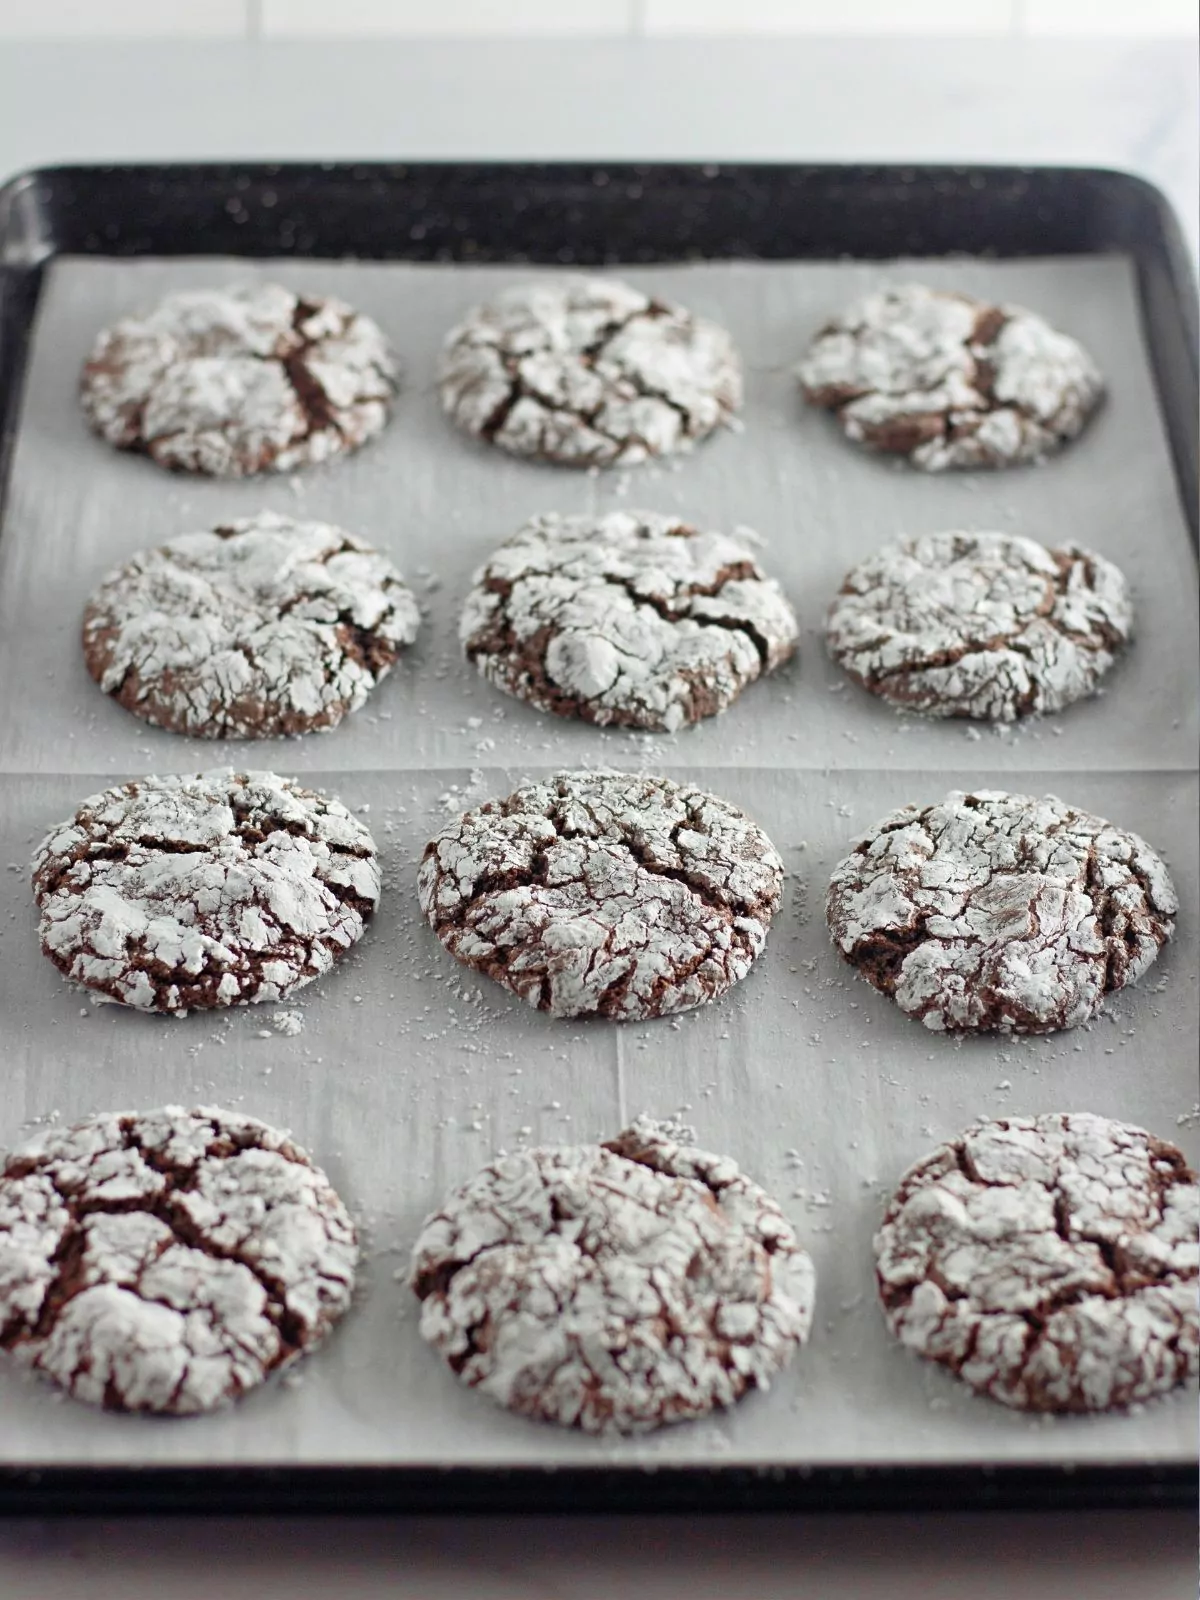 baked chocolate cake mix cookies on baking tray with parchment paper.